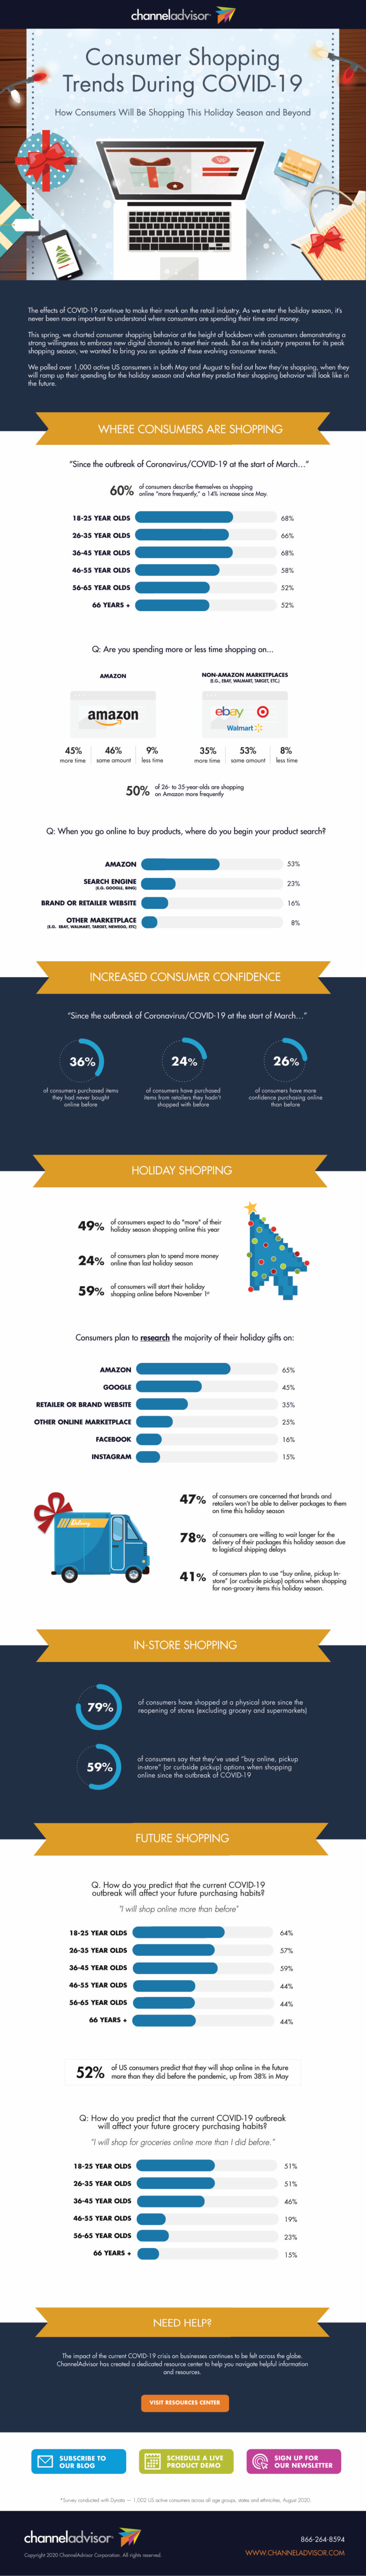 [Infographic] How Consumers Will Shop This Holiday Season & Beyond